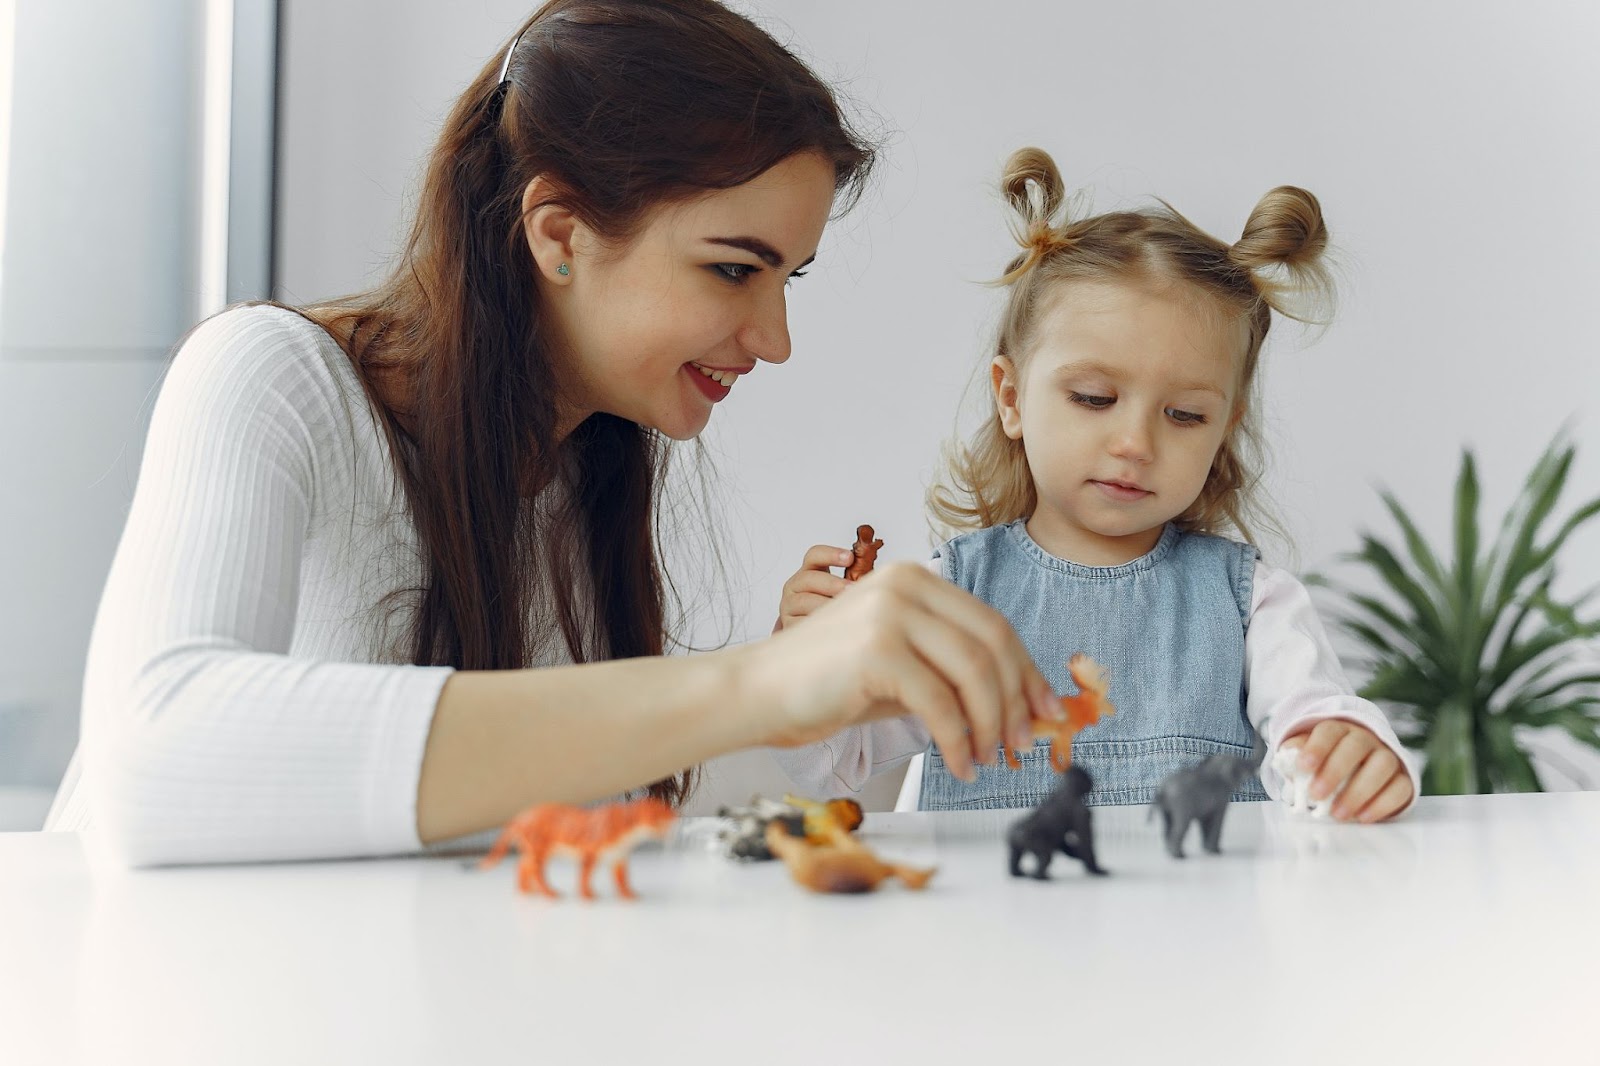 Teacher showing a child how to play with her toys